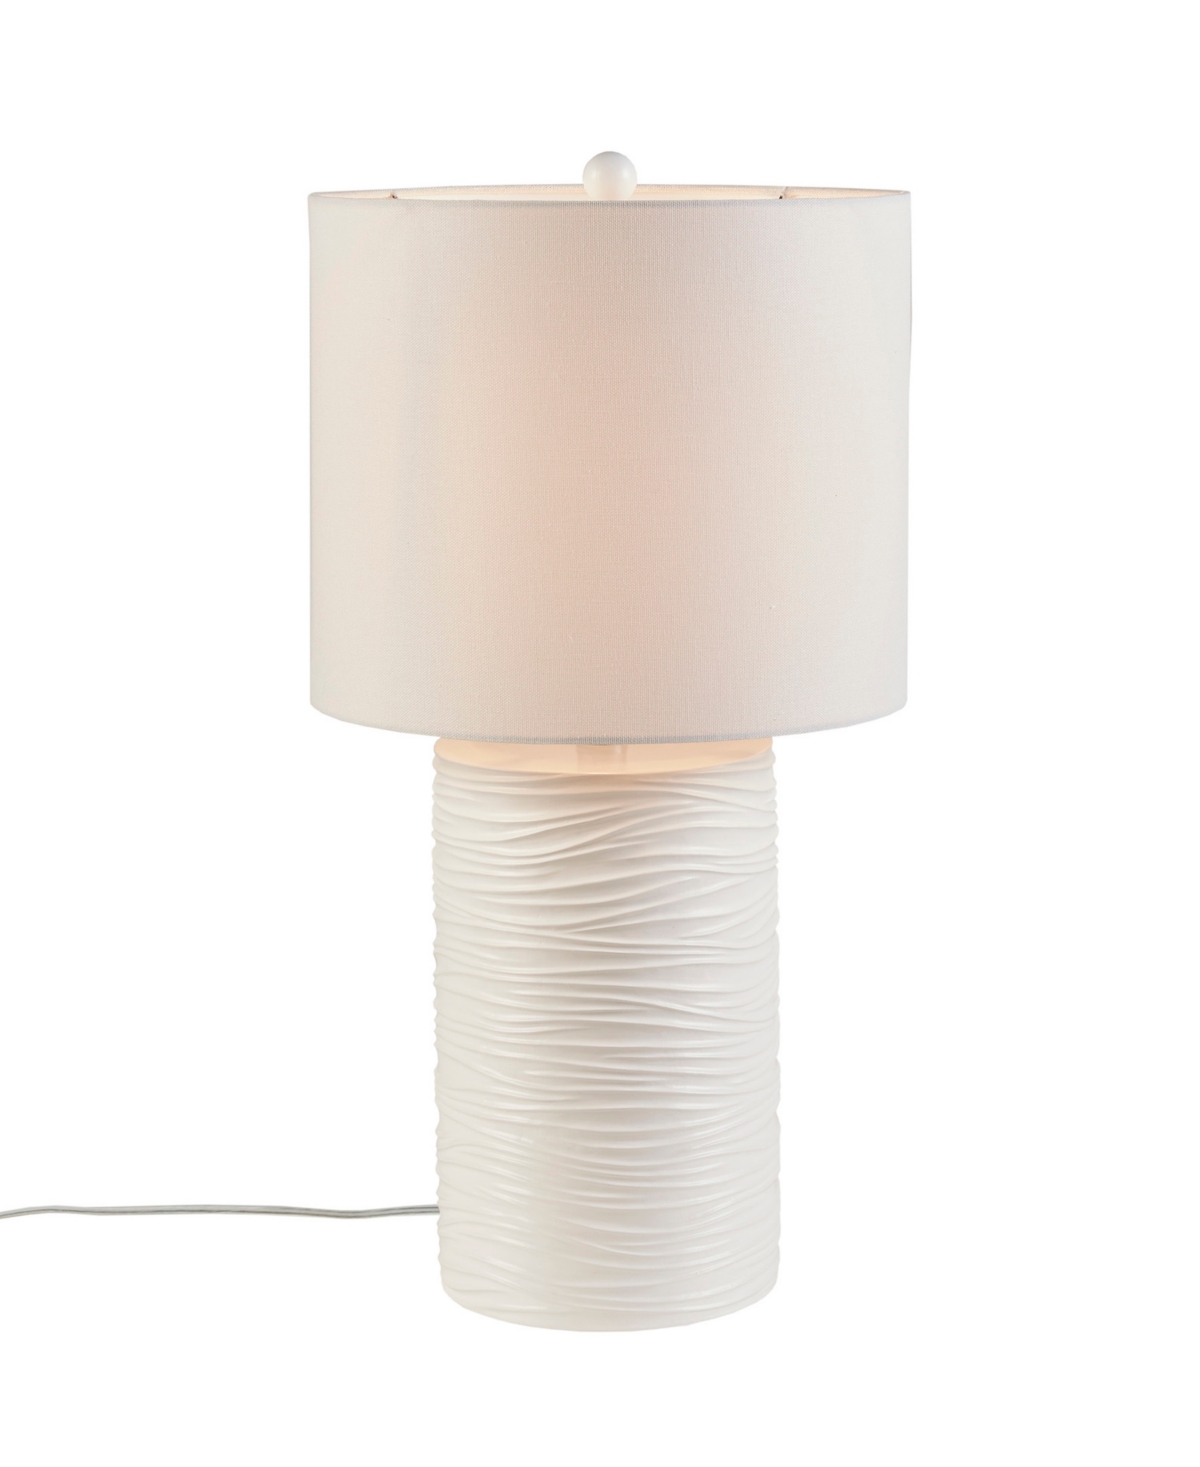 510 Design Crewe Textured Resin Table Lamp In White